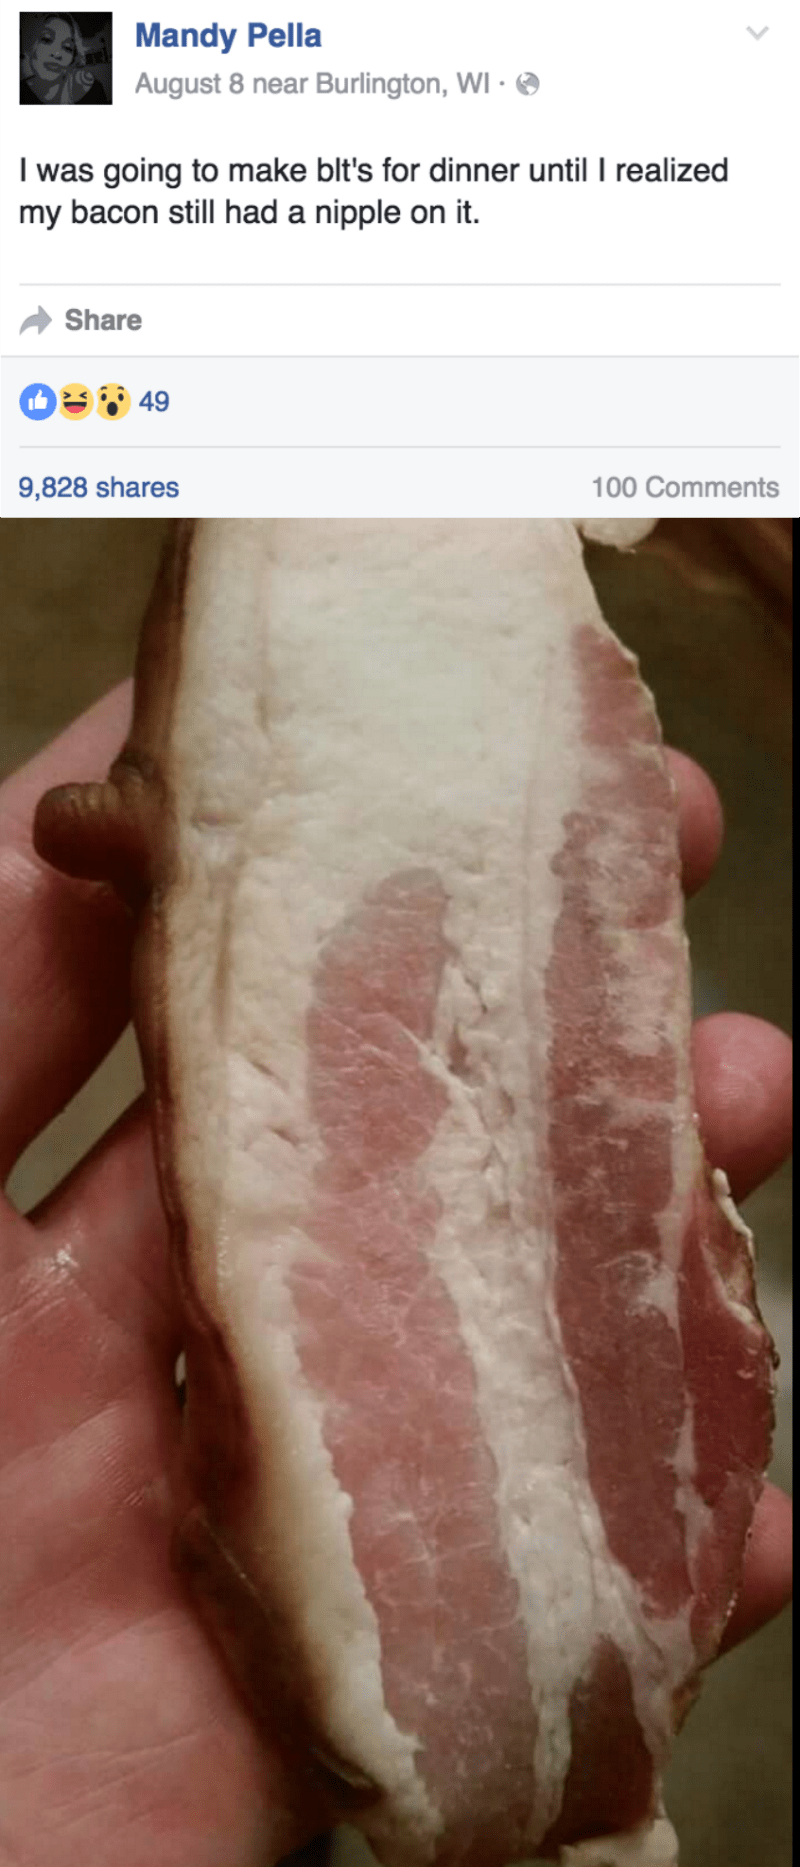 funny fail image woman's bacon still has pig's nipple attached